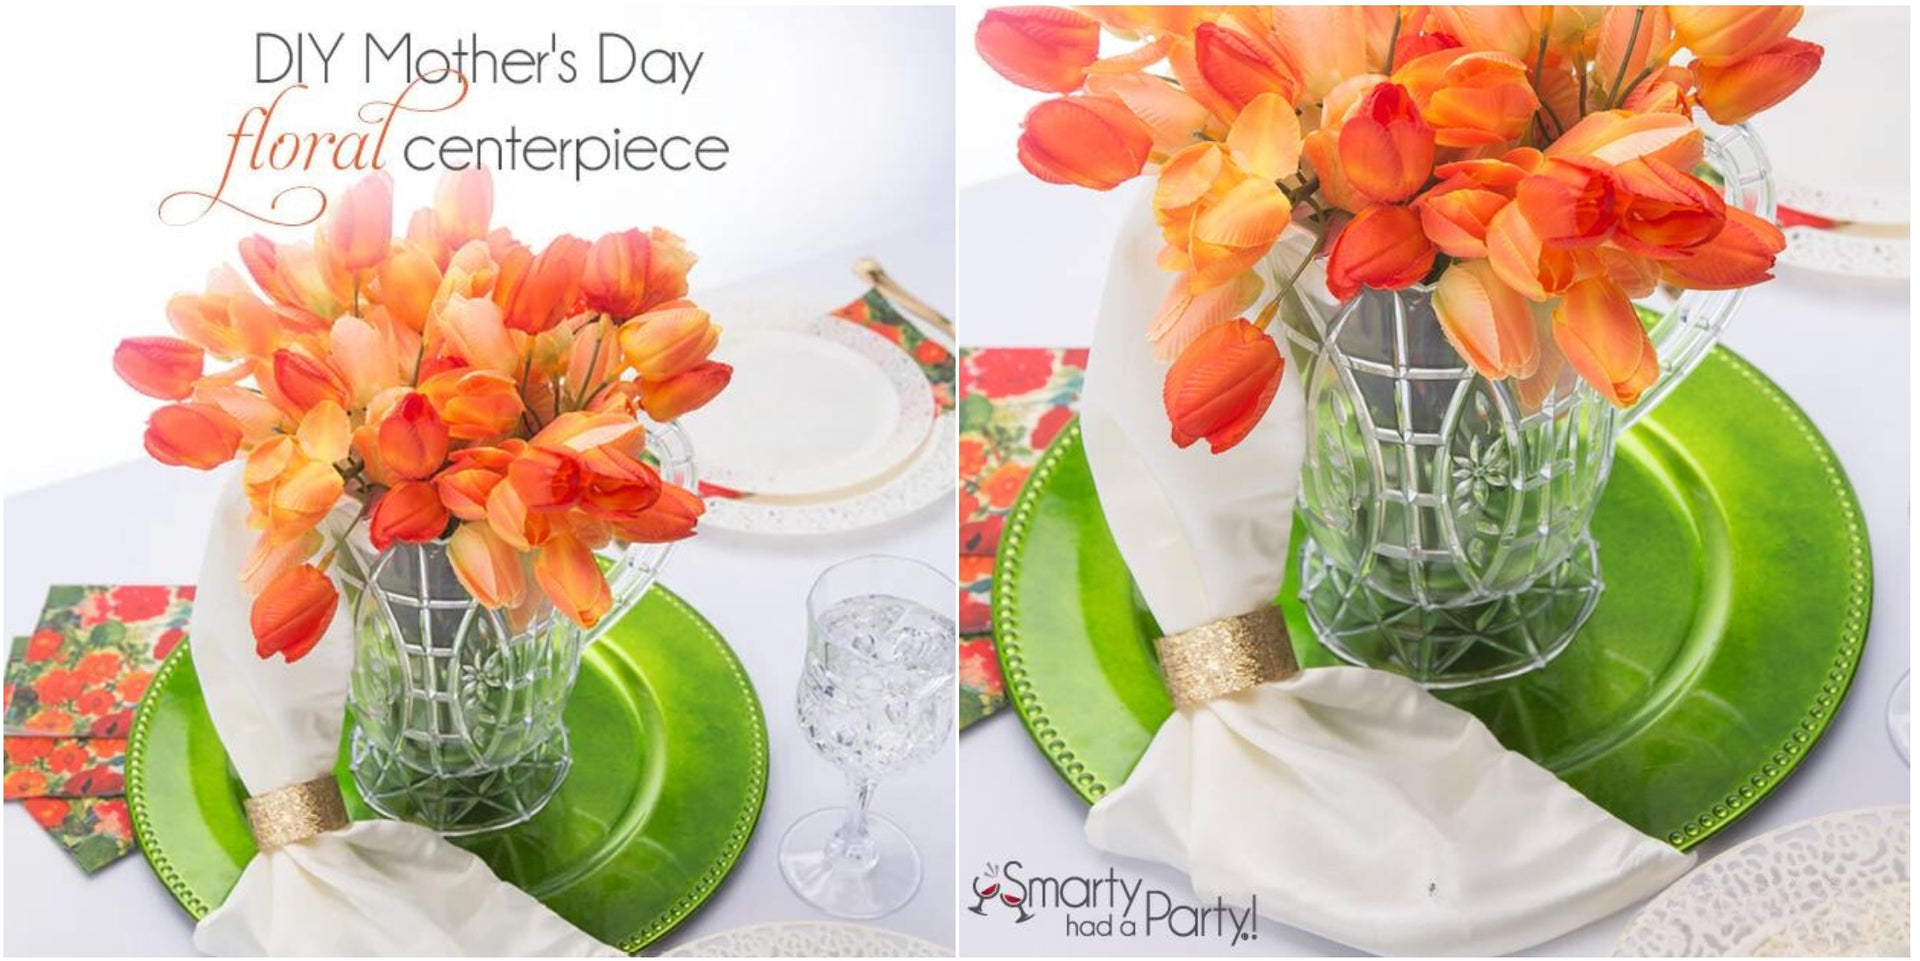 Crafting Beauty: How to Make a Stunning DIY Mother's Day Floral Centerpiece